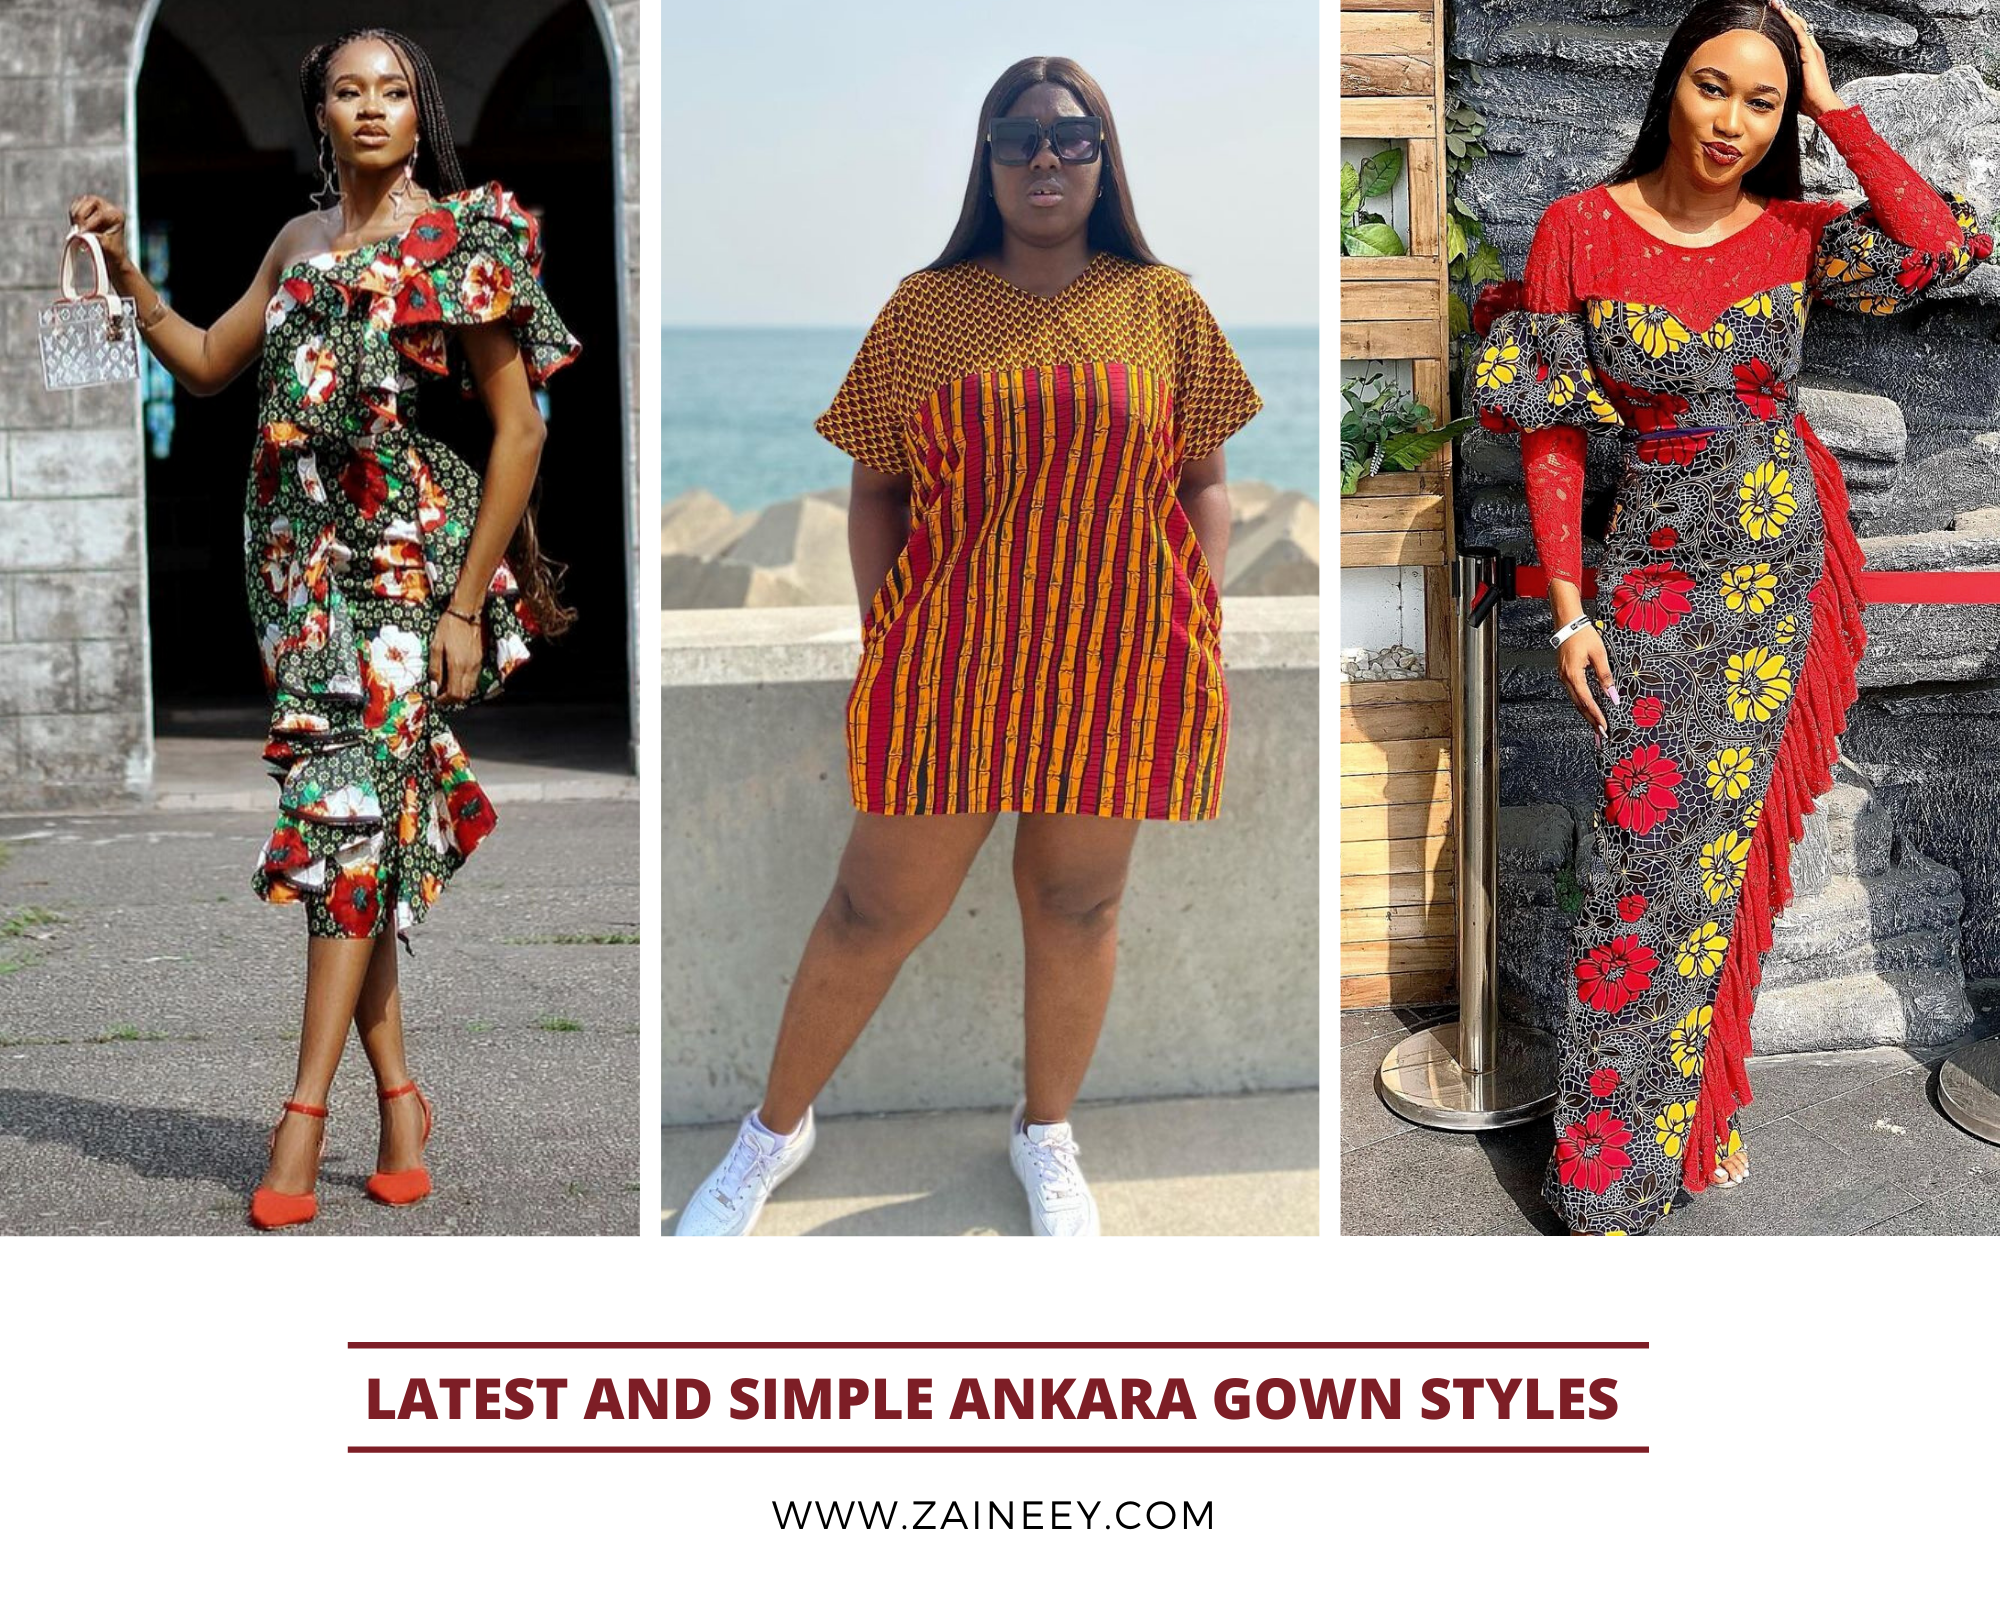 Simple Ankara Short Gown Styles 2021/Ankara Short Gowns Styles For Ladies  2021 - YouTube